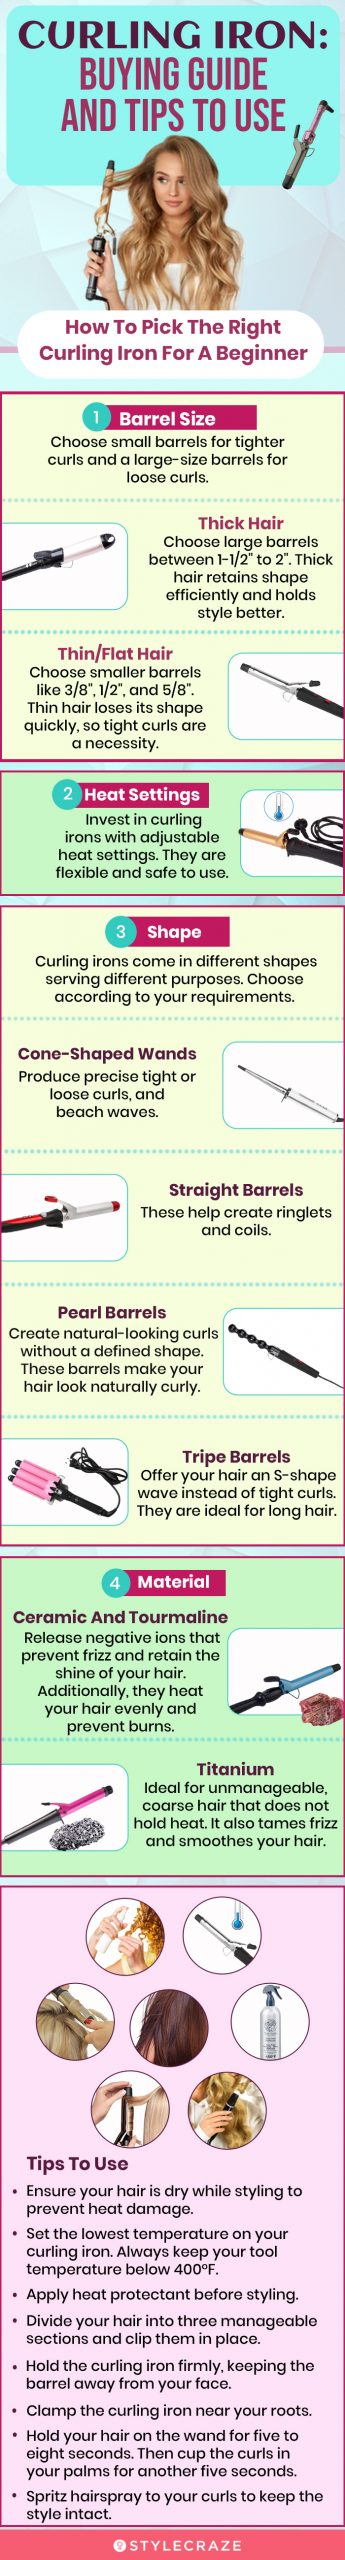 Curling Iron: Buying Guide And Tips To Use [infographic]